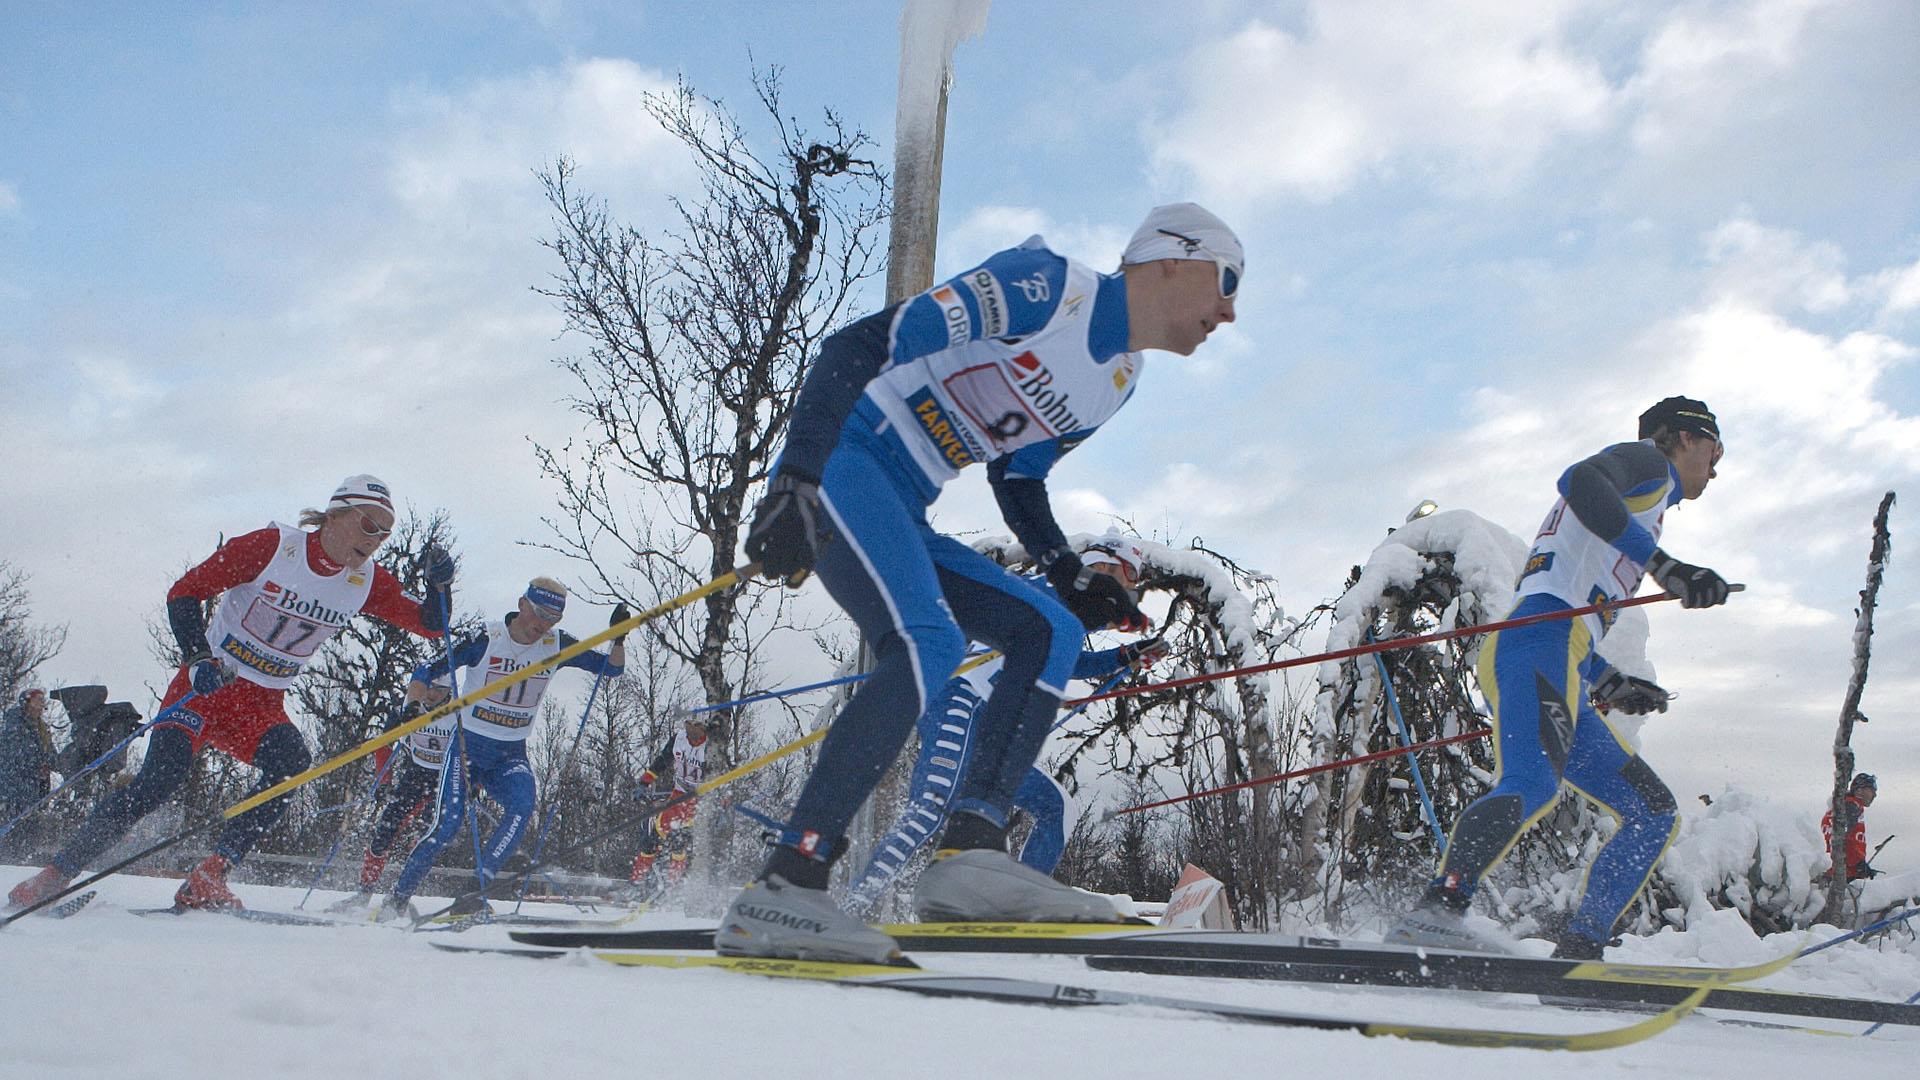 Cross country skiers at Beitosprinten